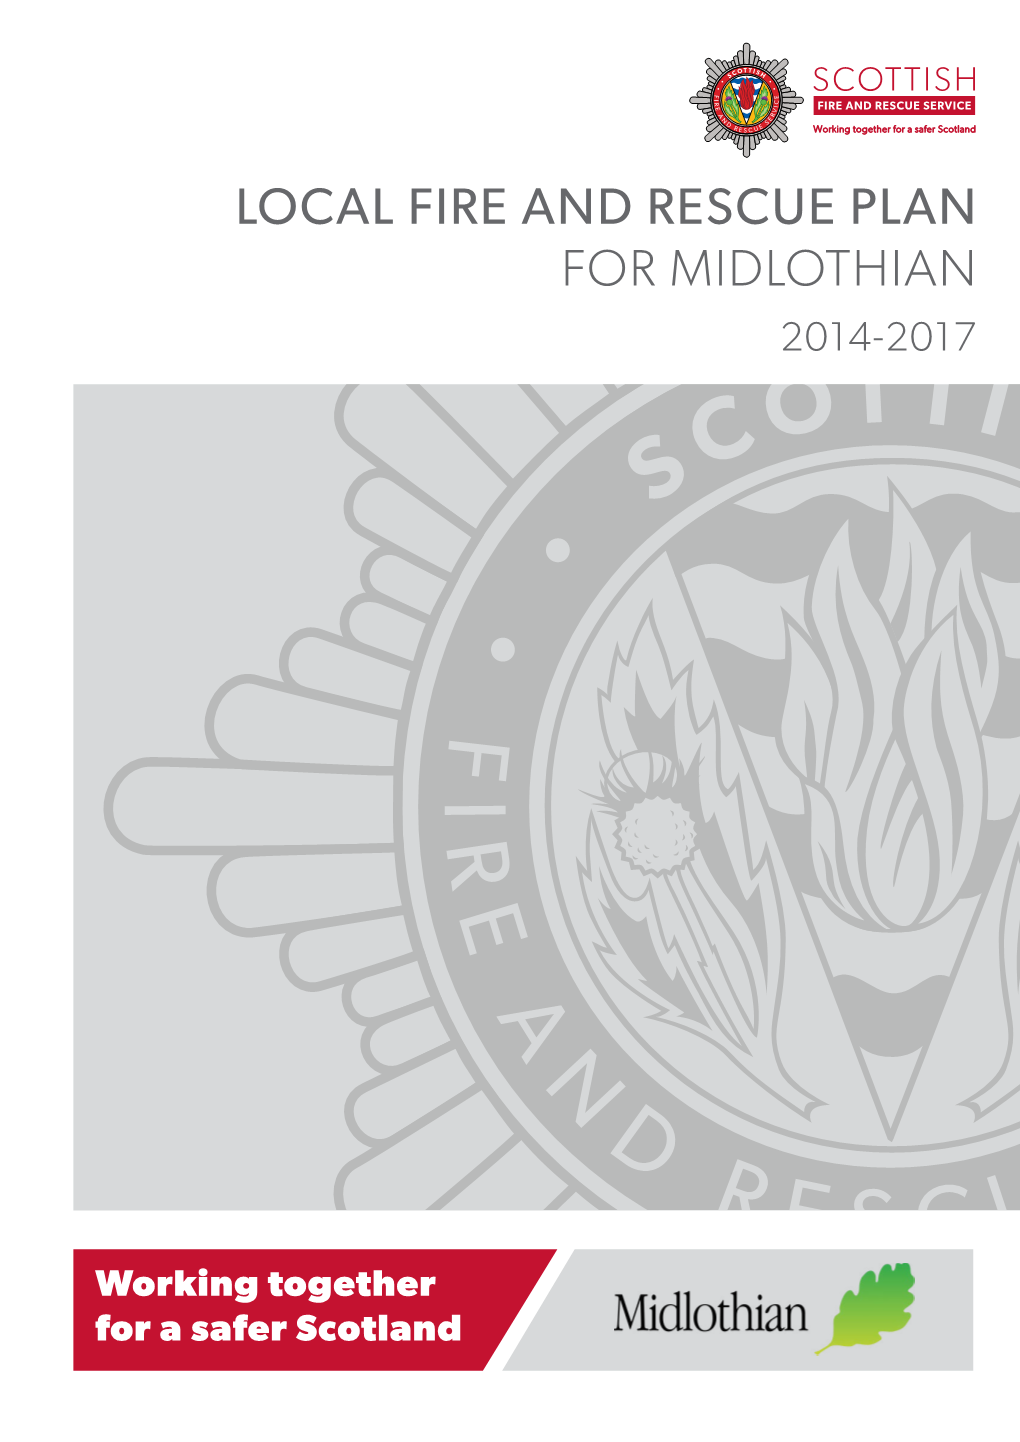 Local Fire and Rescue Plan for Midlothian 2014-2017